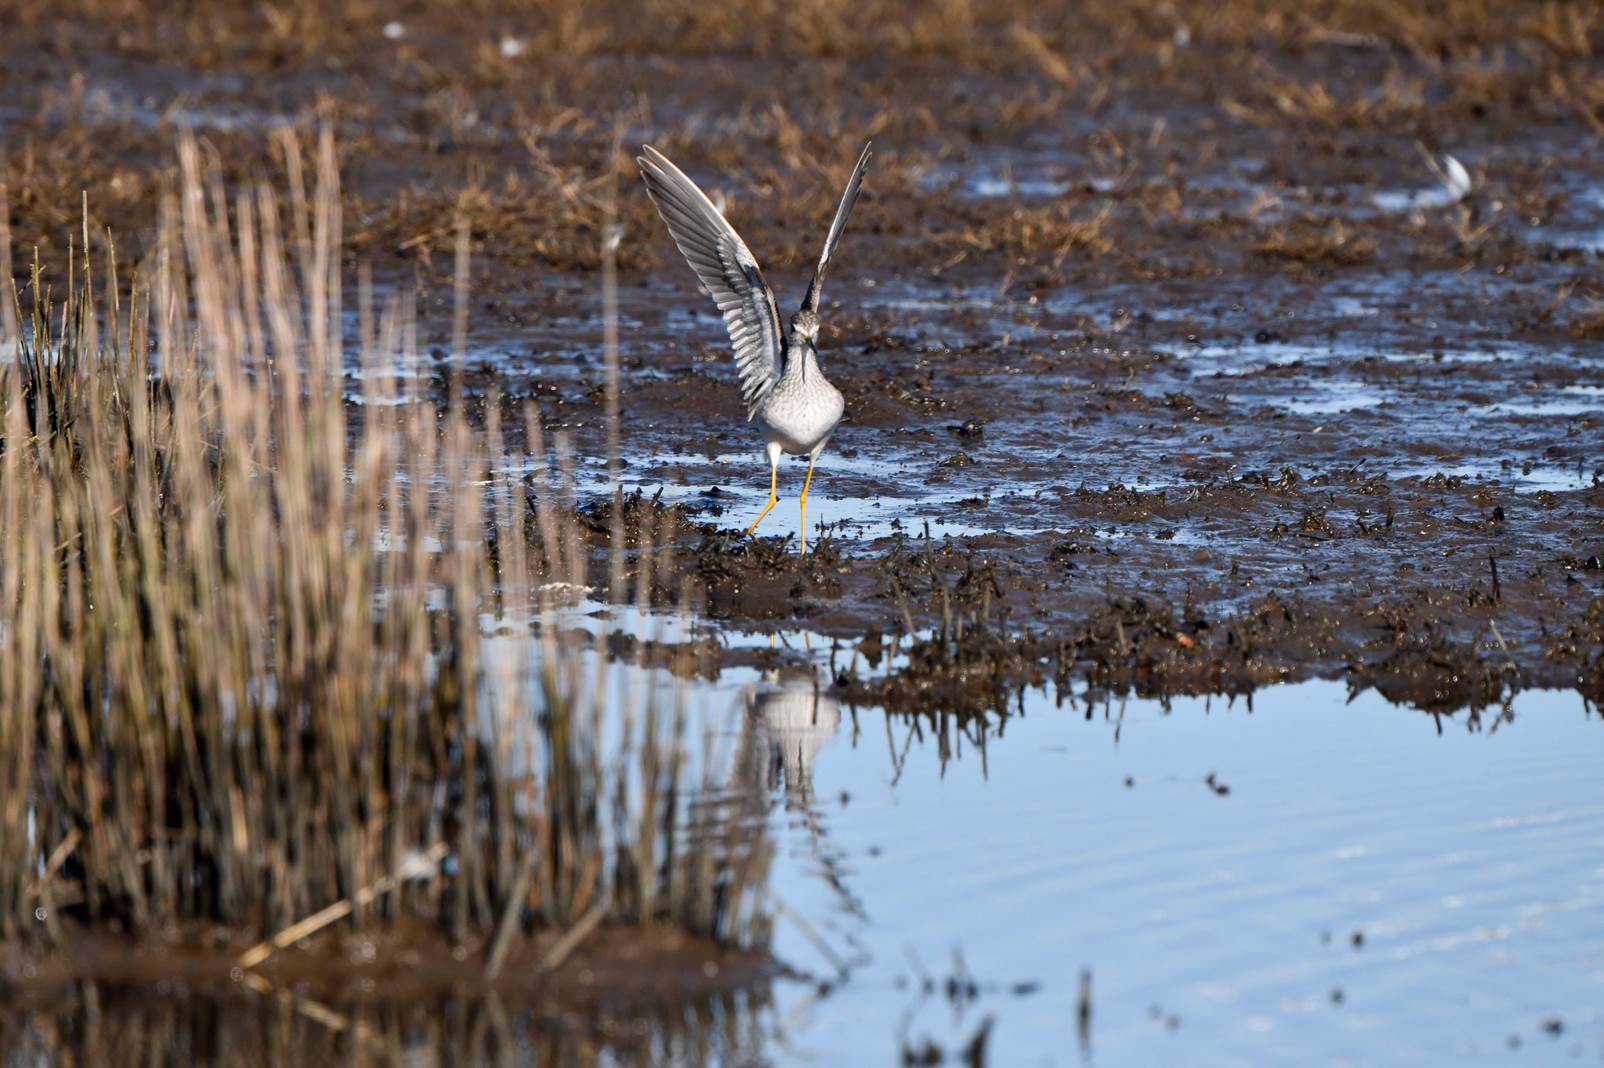 A bird standing in a marsh

Description automatically generated